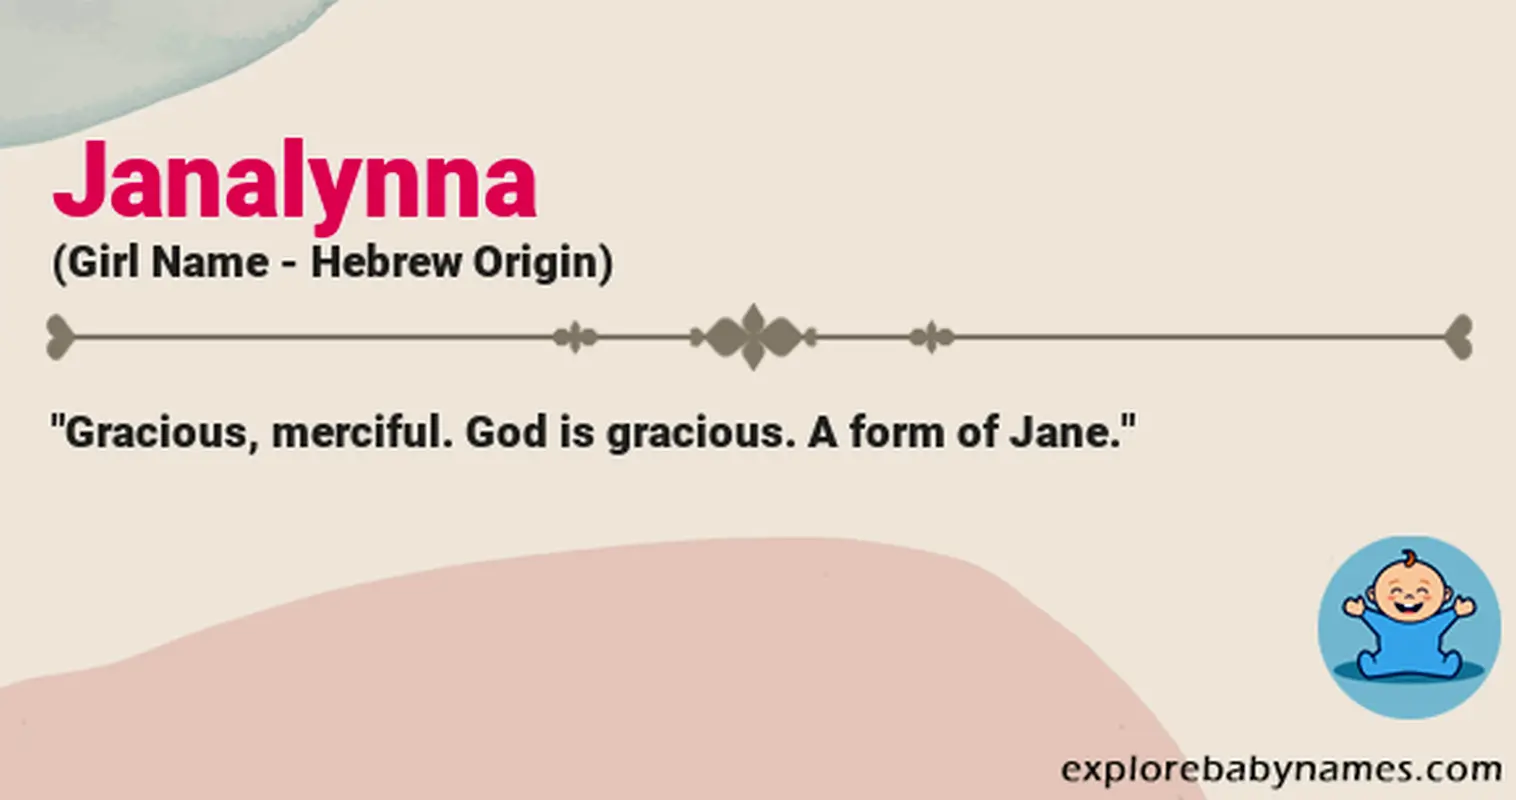 Meaning of Janalynna